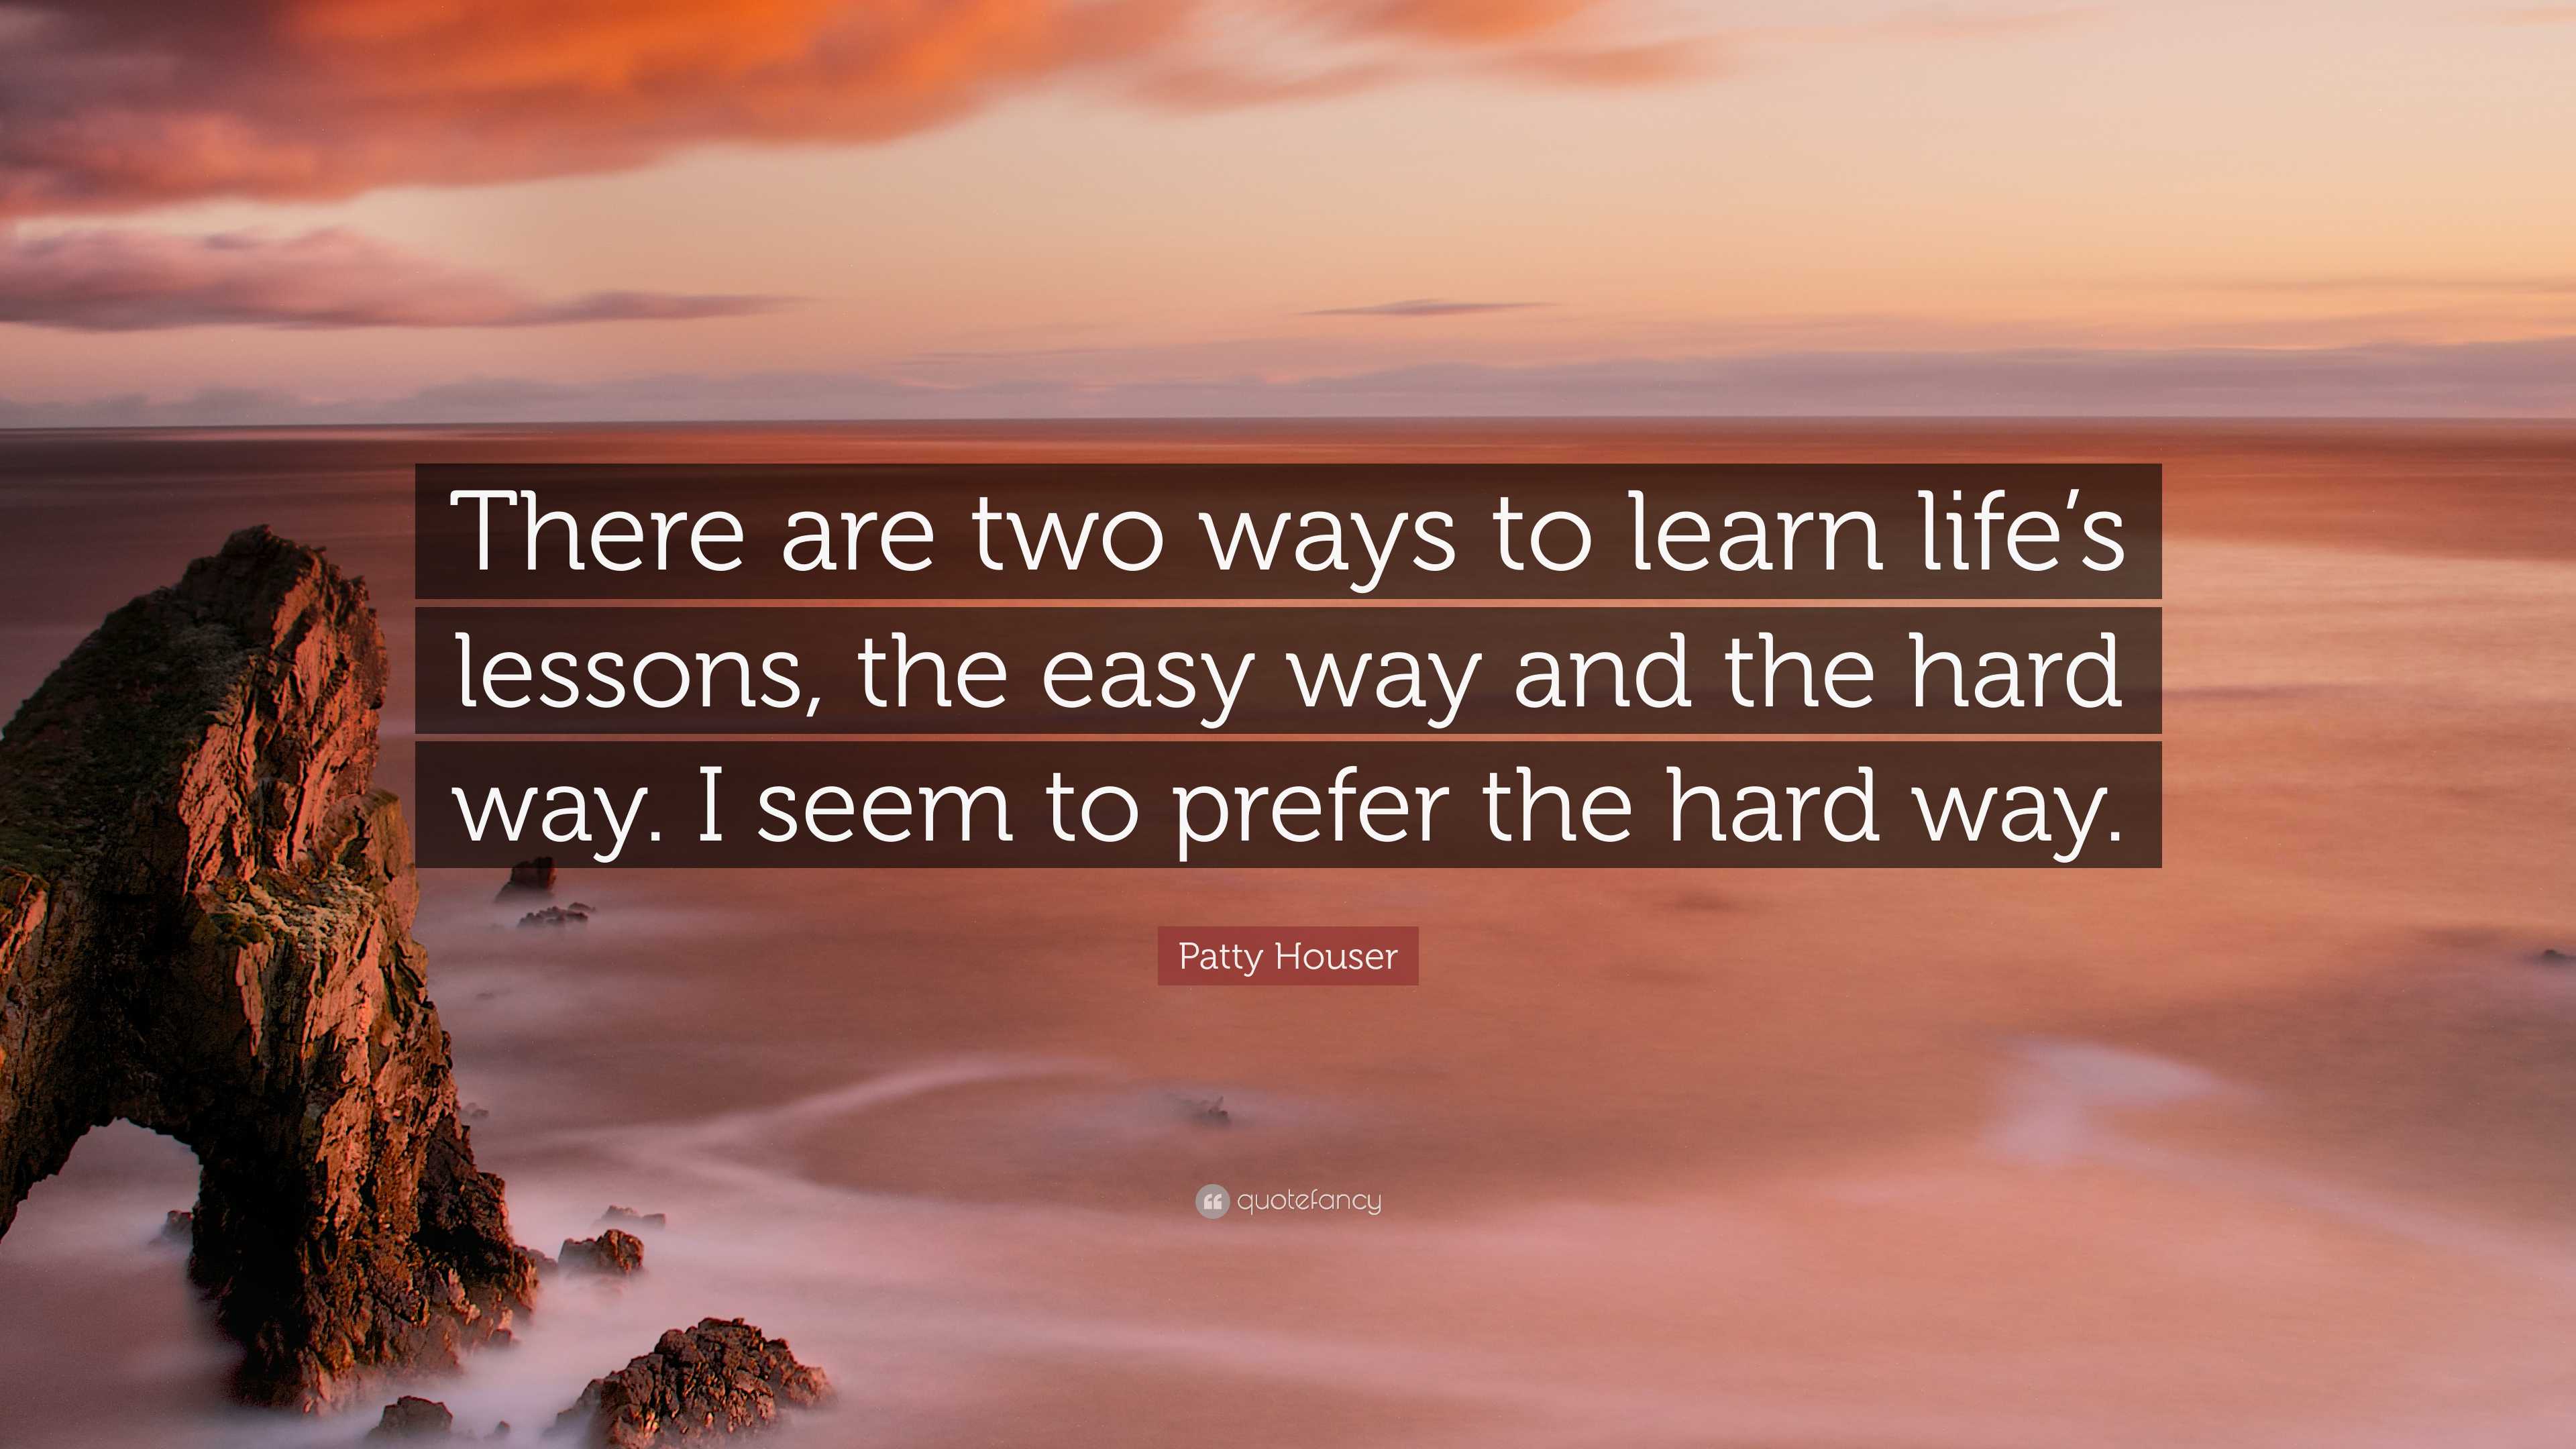 Patty Houser Quote: “There are two ways to learn life's lessons